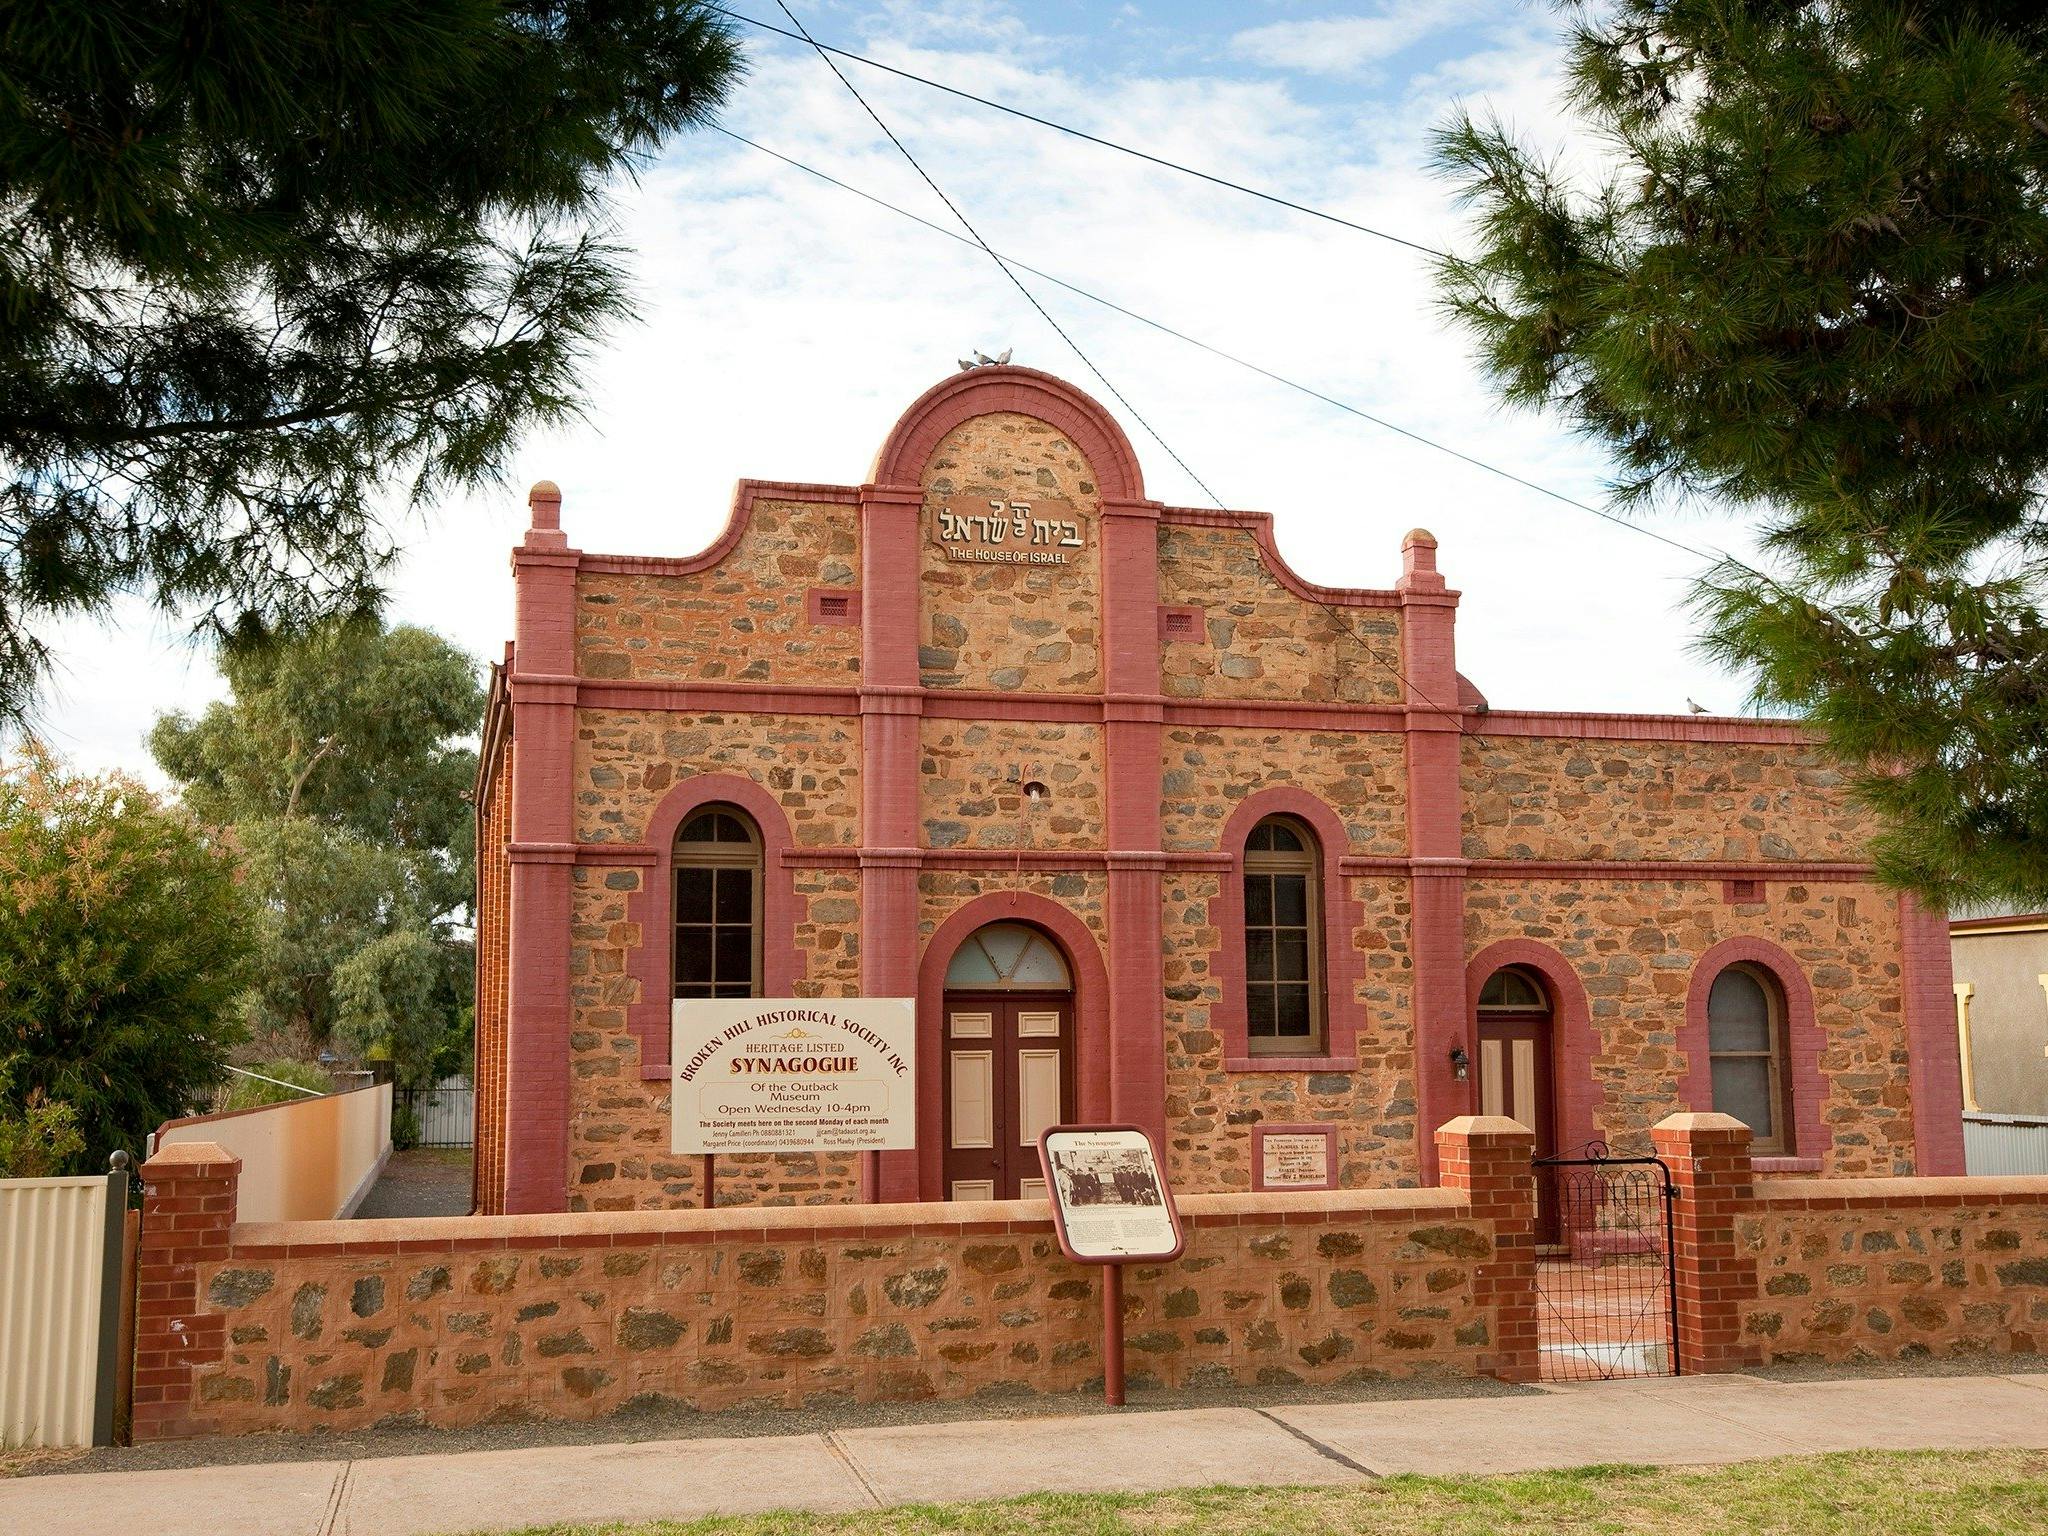 Synagogue of the Outback Museum